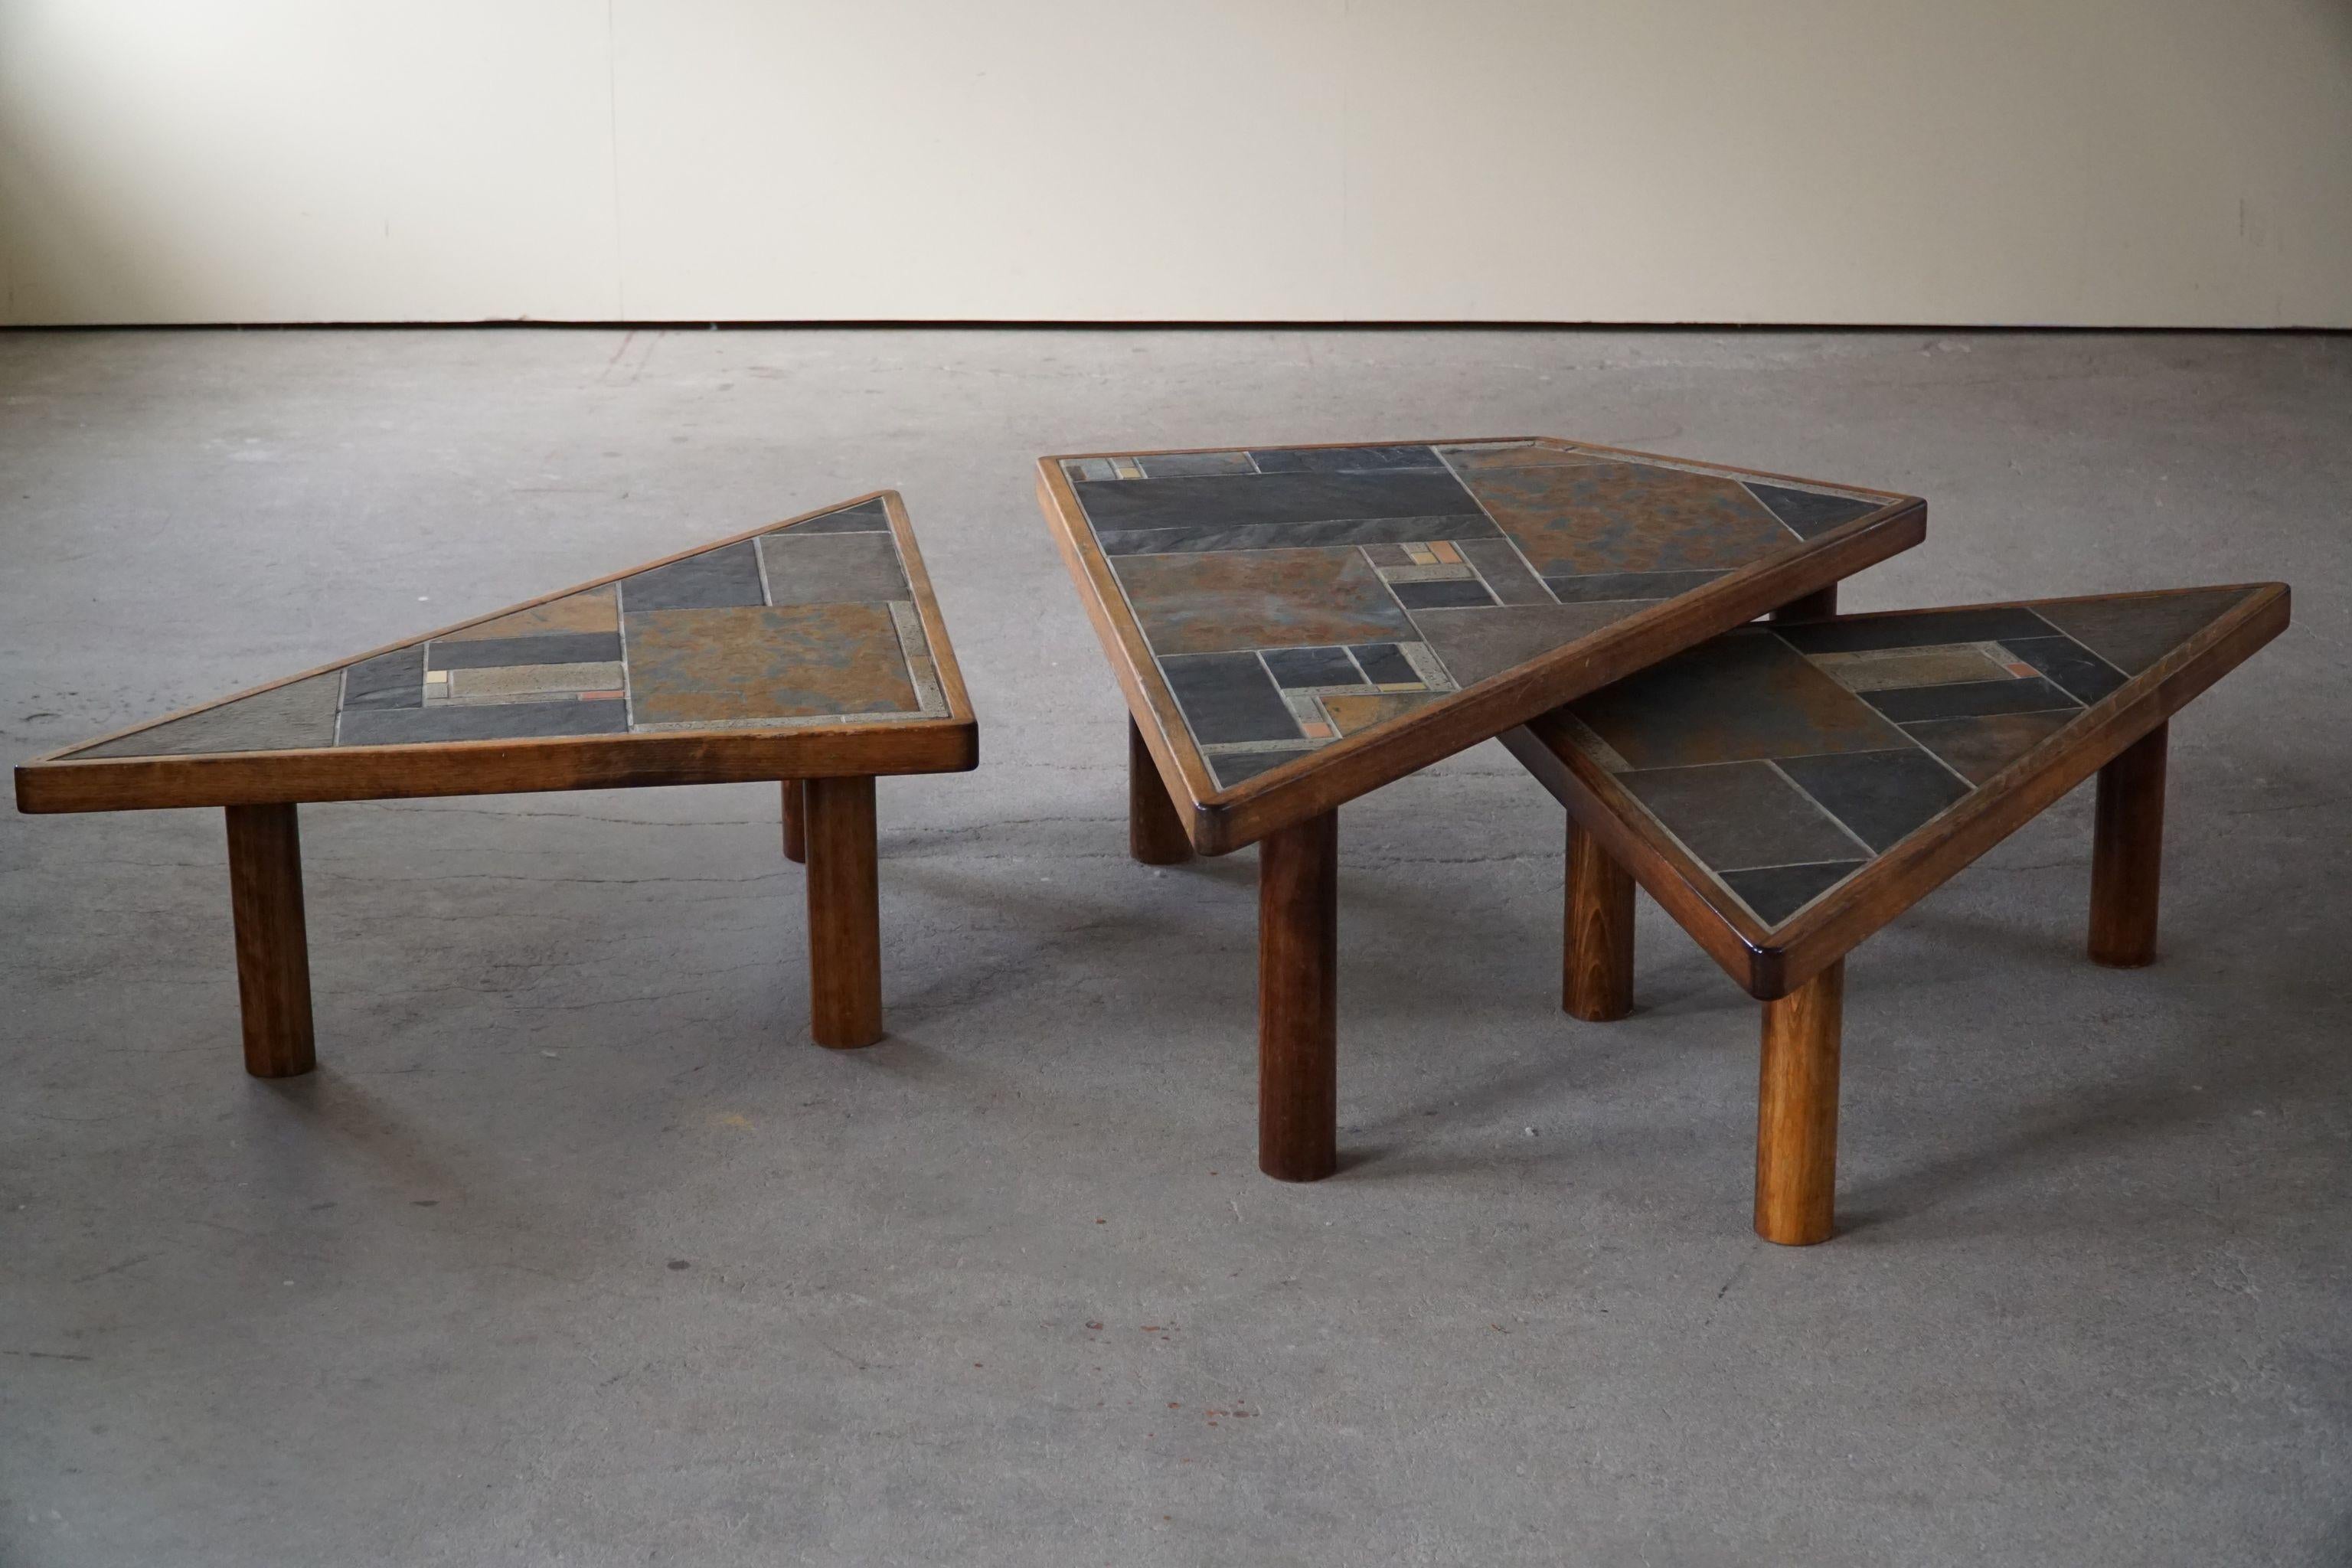 Danish Modern, Set of 3 Coffee Tables with Ceramic Tiles by Sallingeboe, 1970s 1